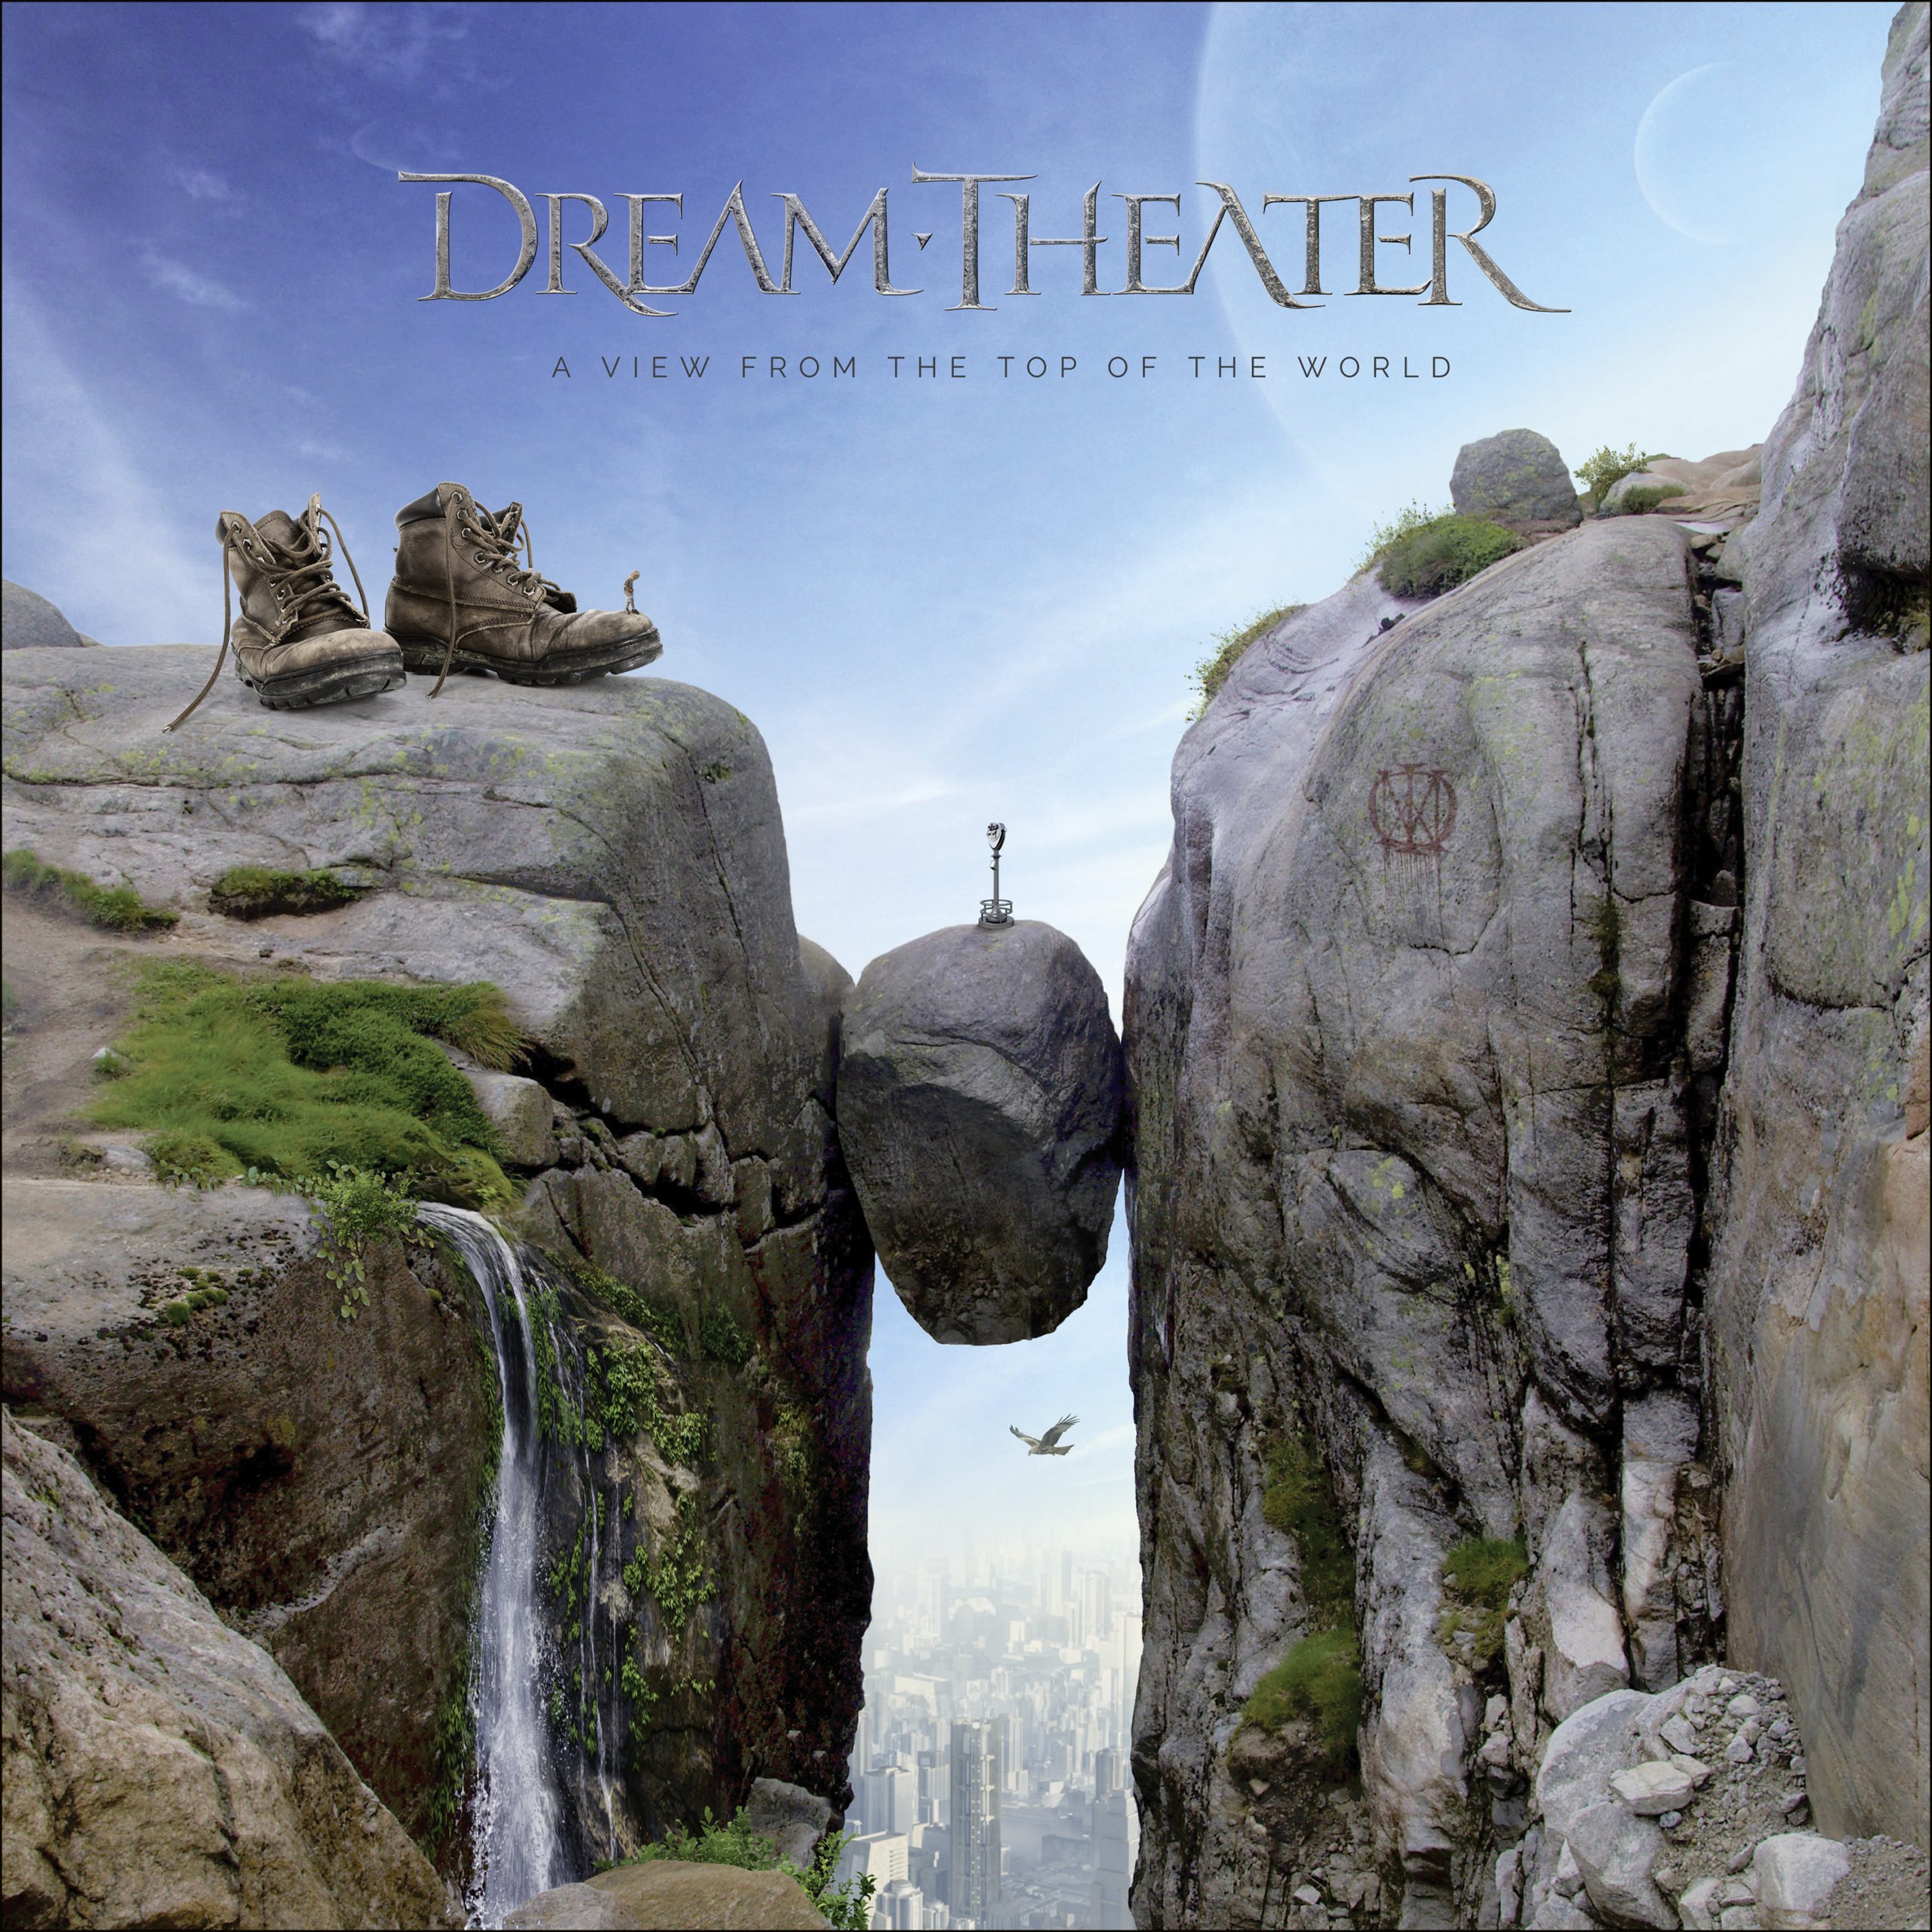 Dream Theater - A View From The Top Of The World (2021) 24bit FLAC Download